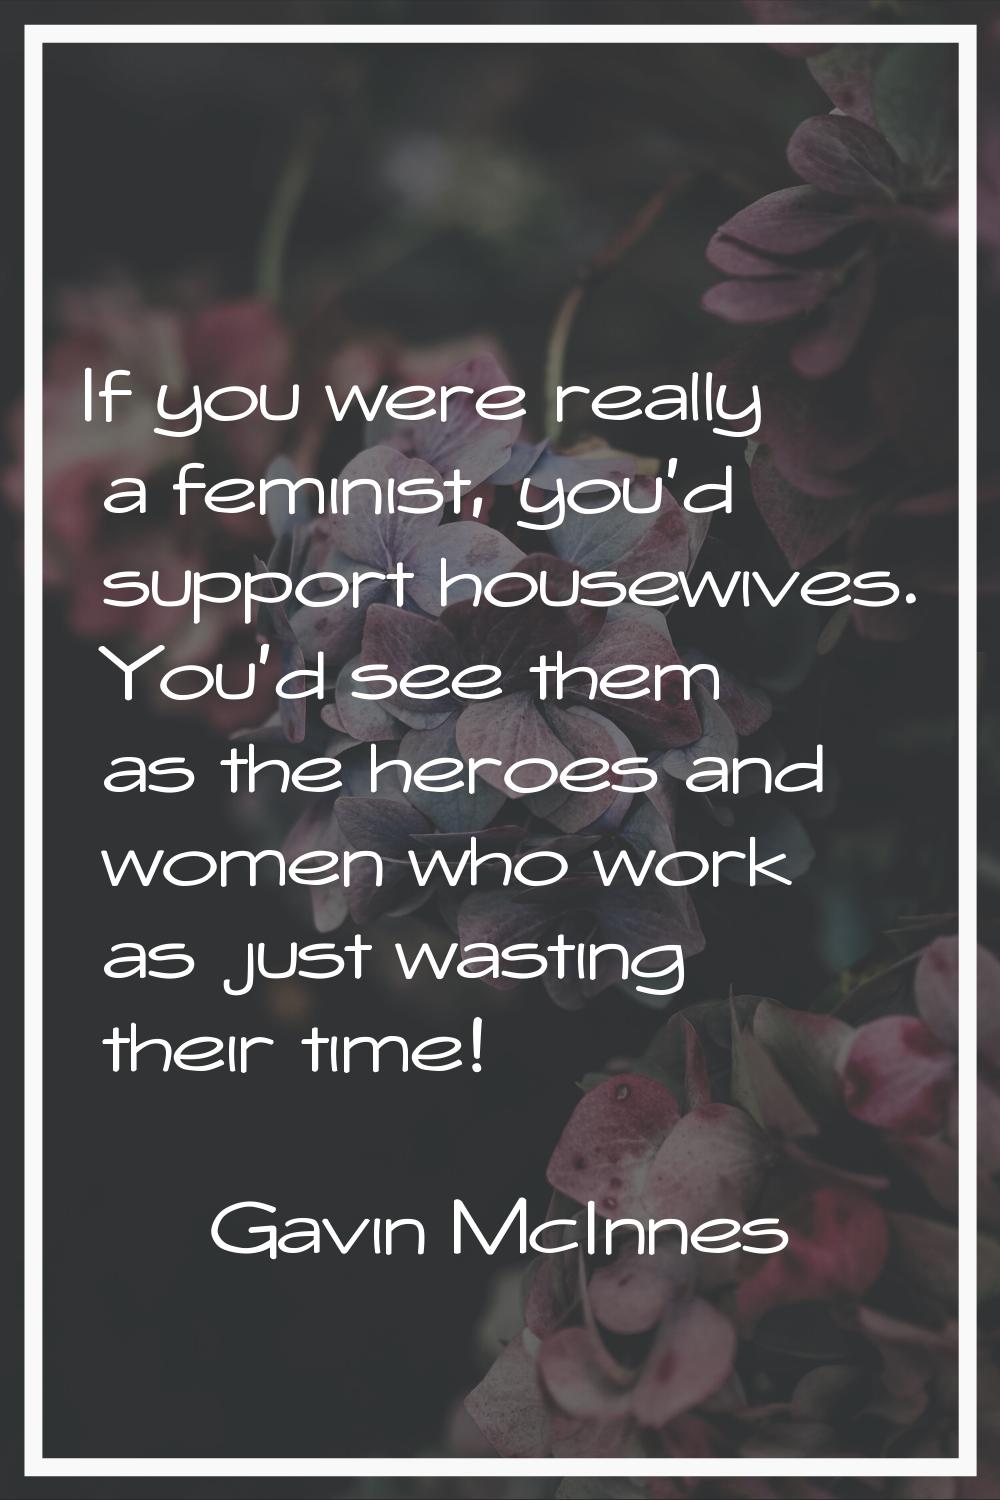 If you were really a feminist, you'd support housewives. You'd see them as the heroes and women who